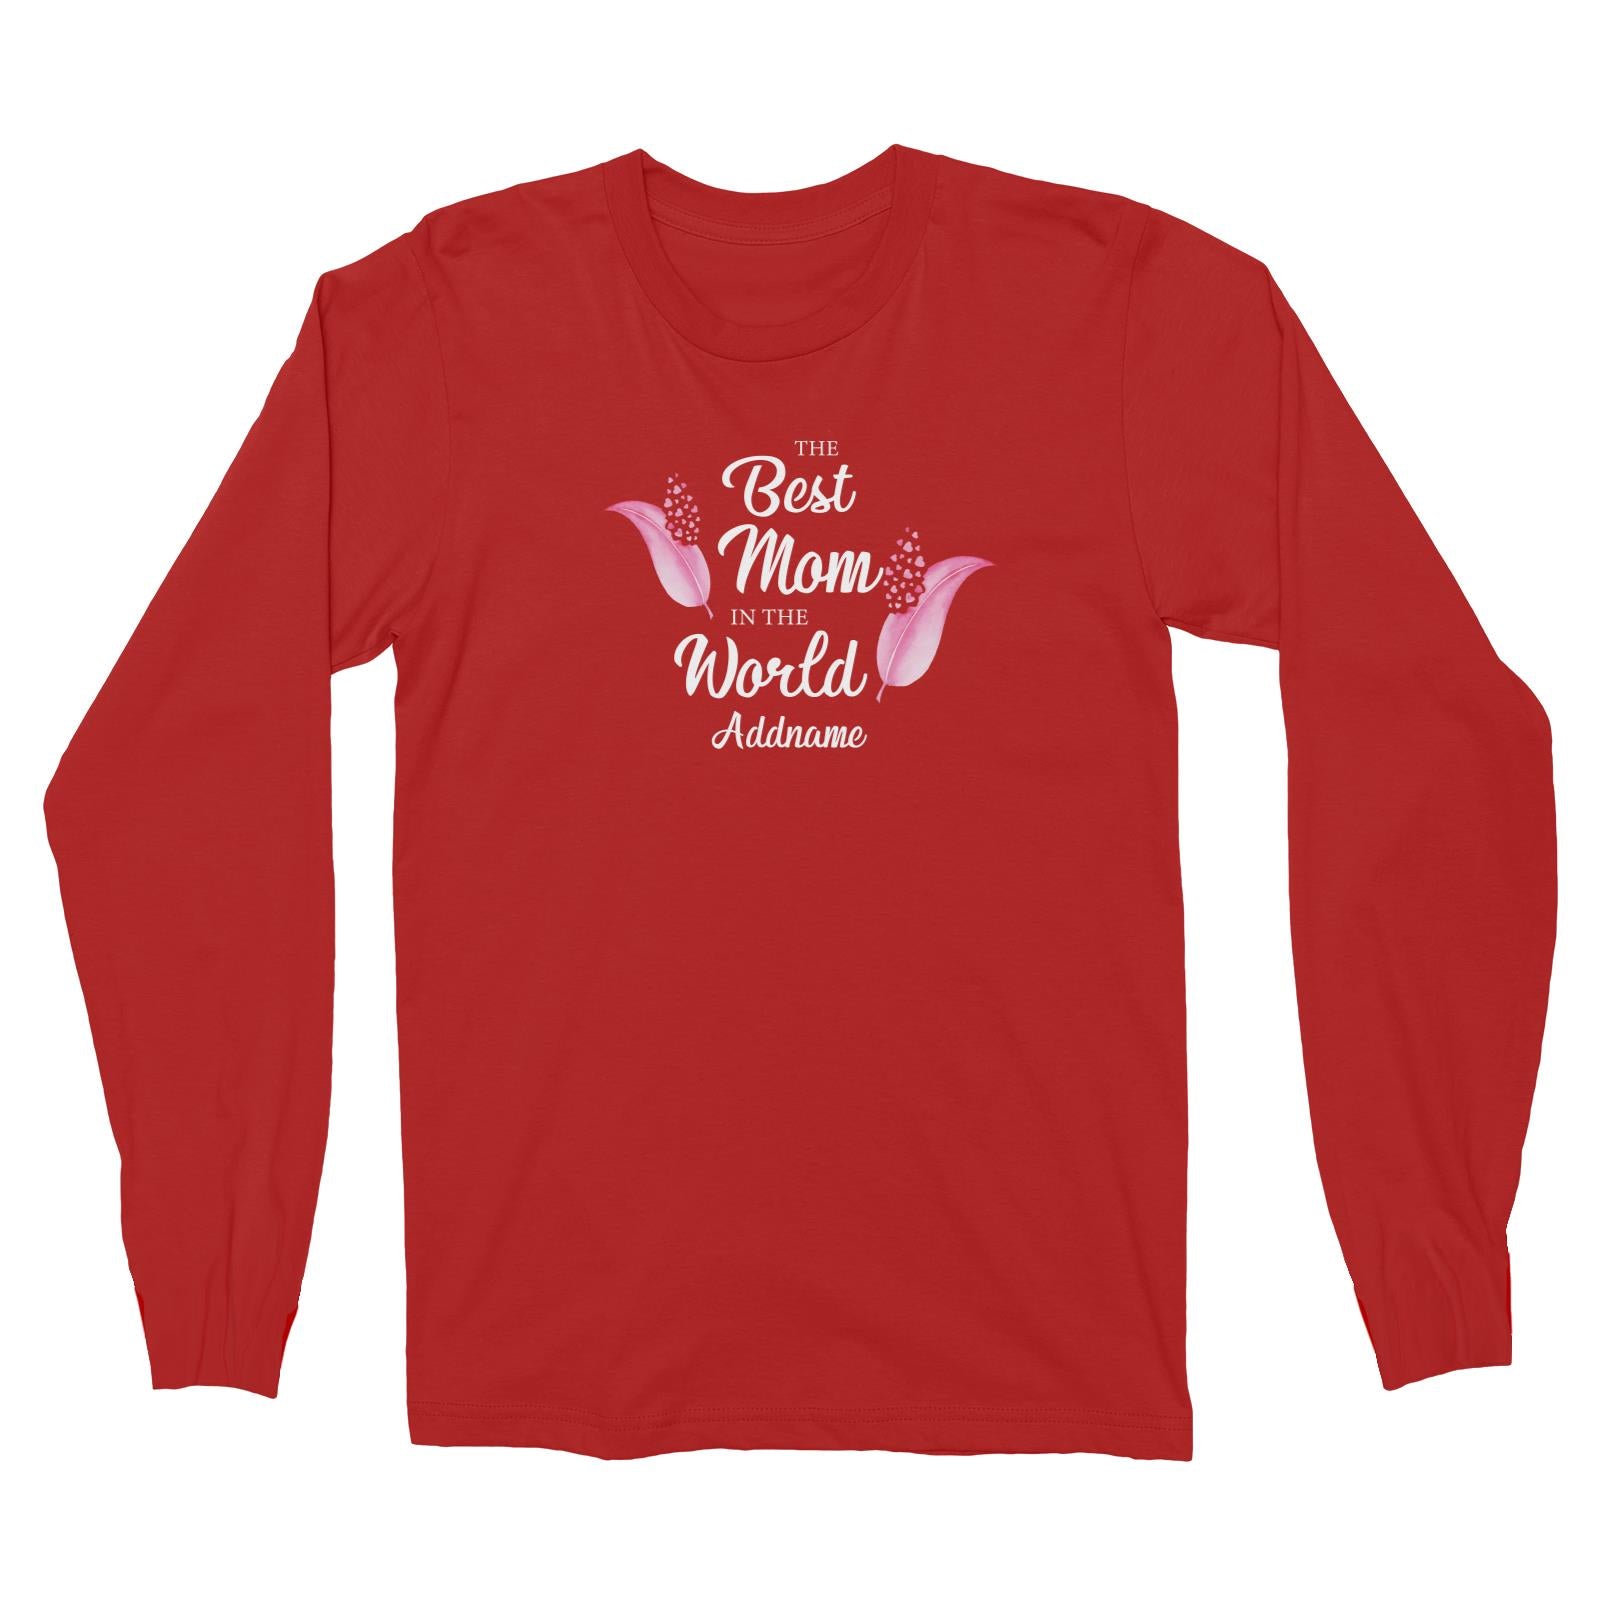 Sweet Mom Quotes 1 Love Feathers The Best Mom In The World Addname Long Sleeve Unisex T-Shirt